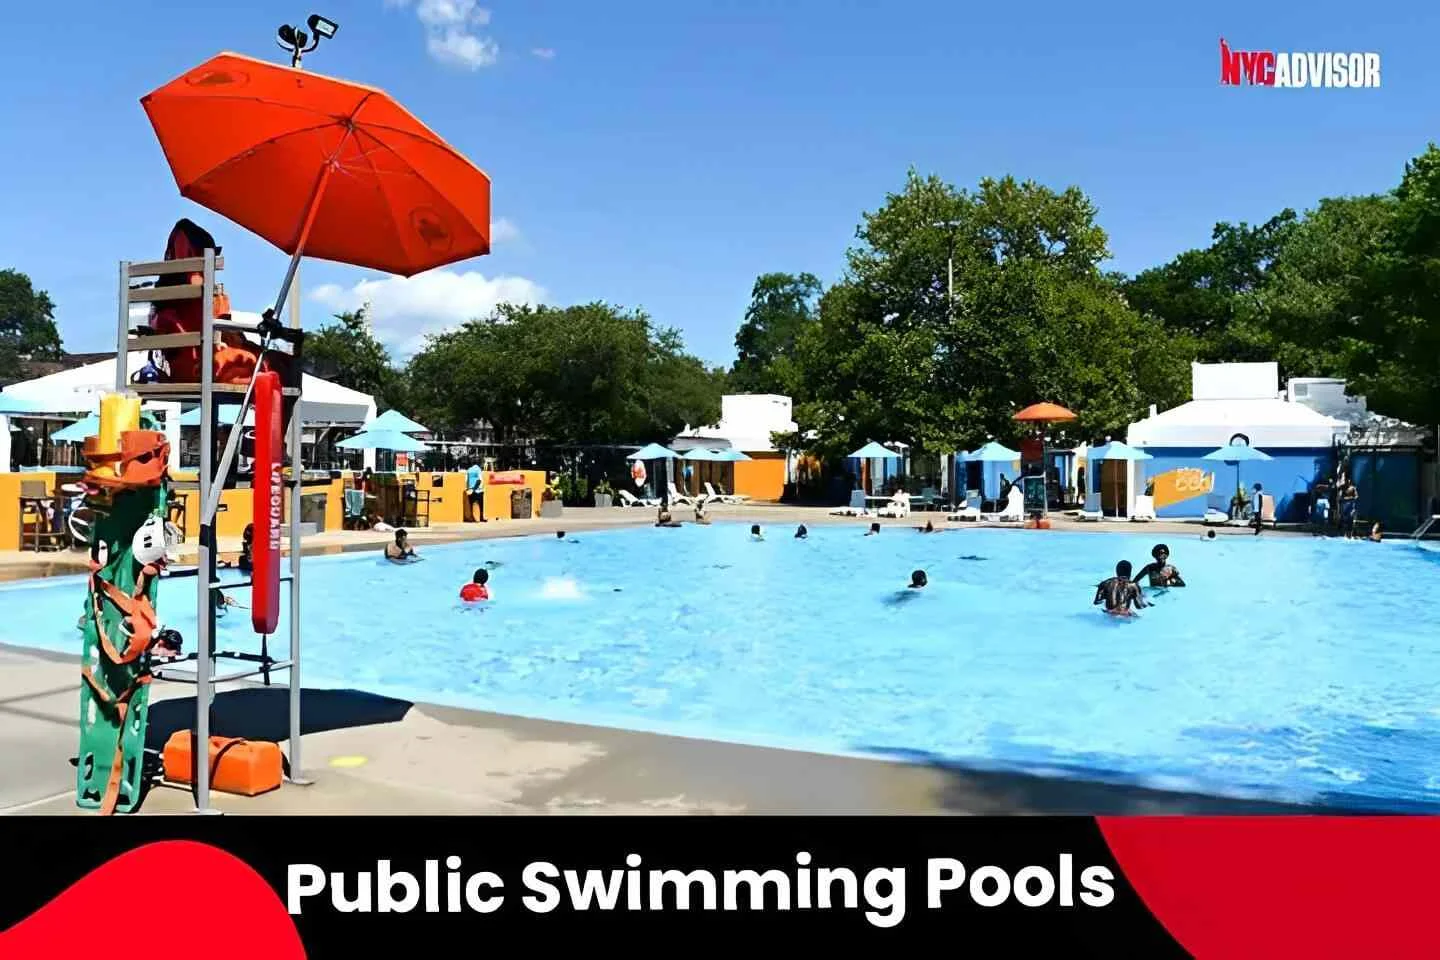 Public Swimming Pools in New York City in Summer